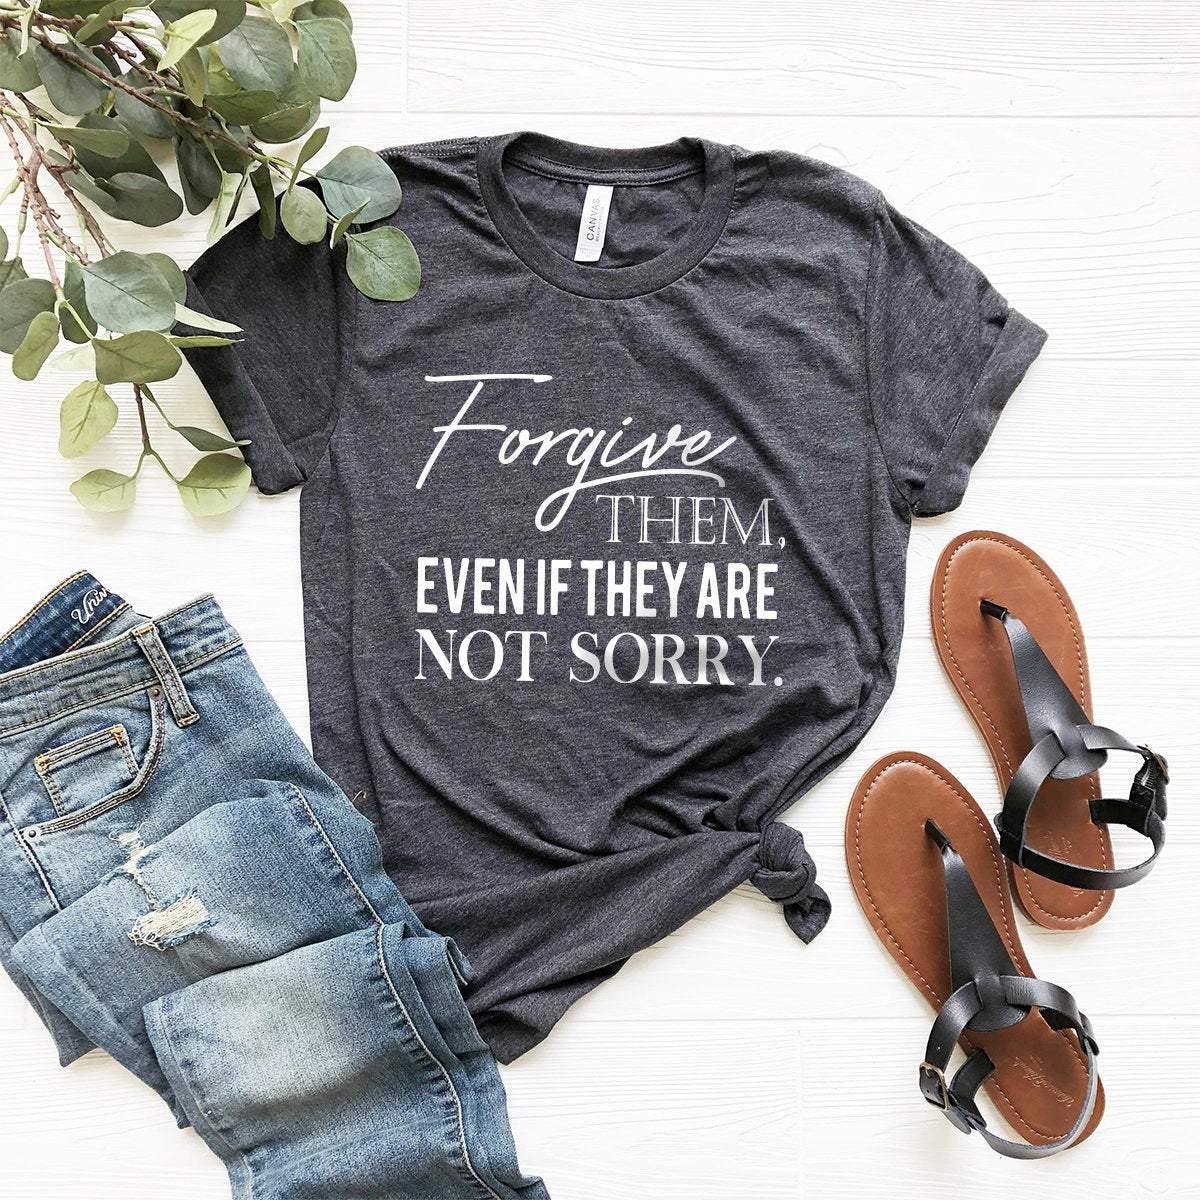 Forgive Them Even If They Are Not Sorry Shirt, Motivational Shirt,Motivation Shirt,Positivity Shirt, Bible Quote Shirt, Jesus, Chirst - Fastdeliverytees.com